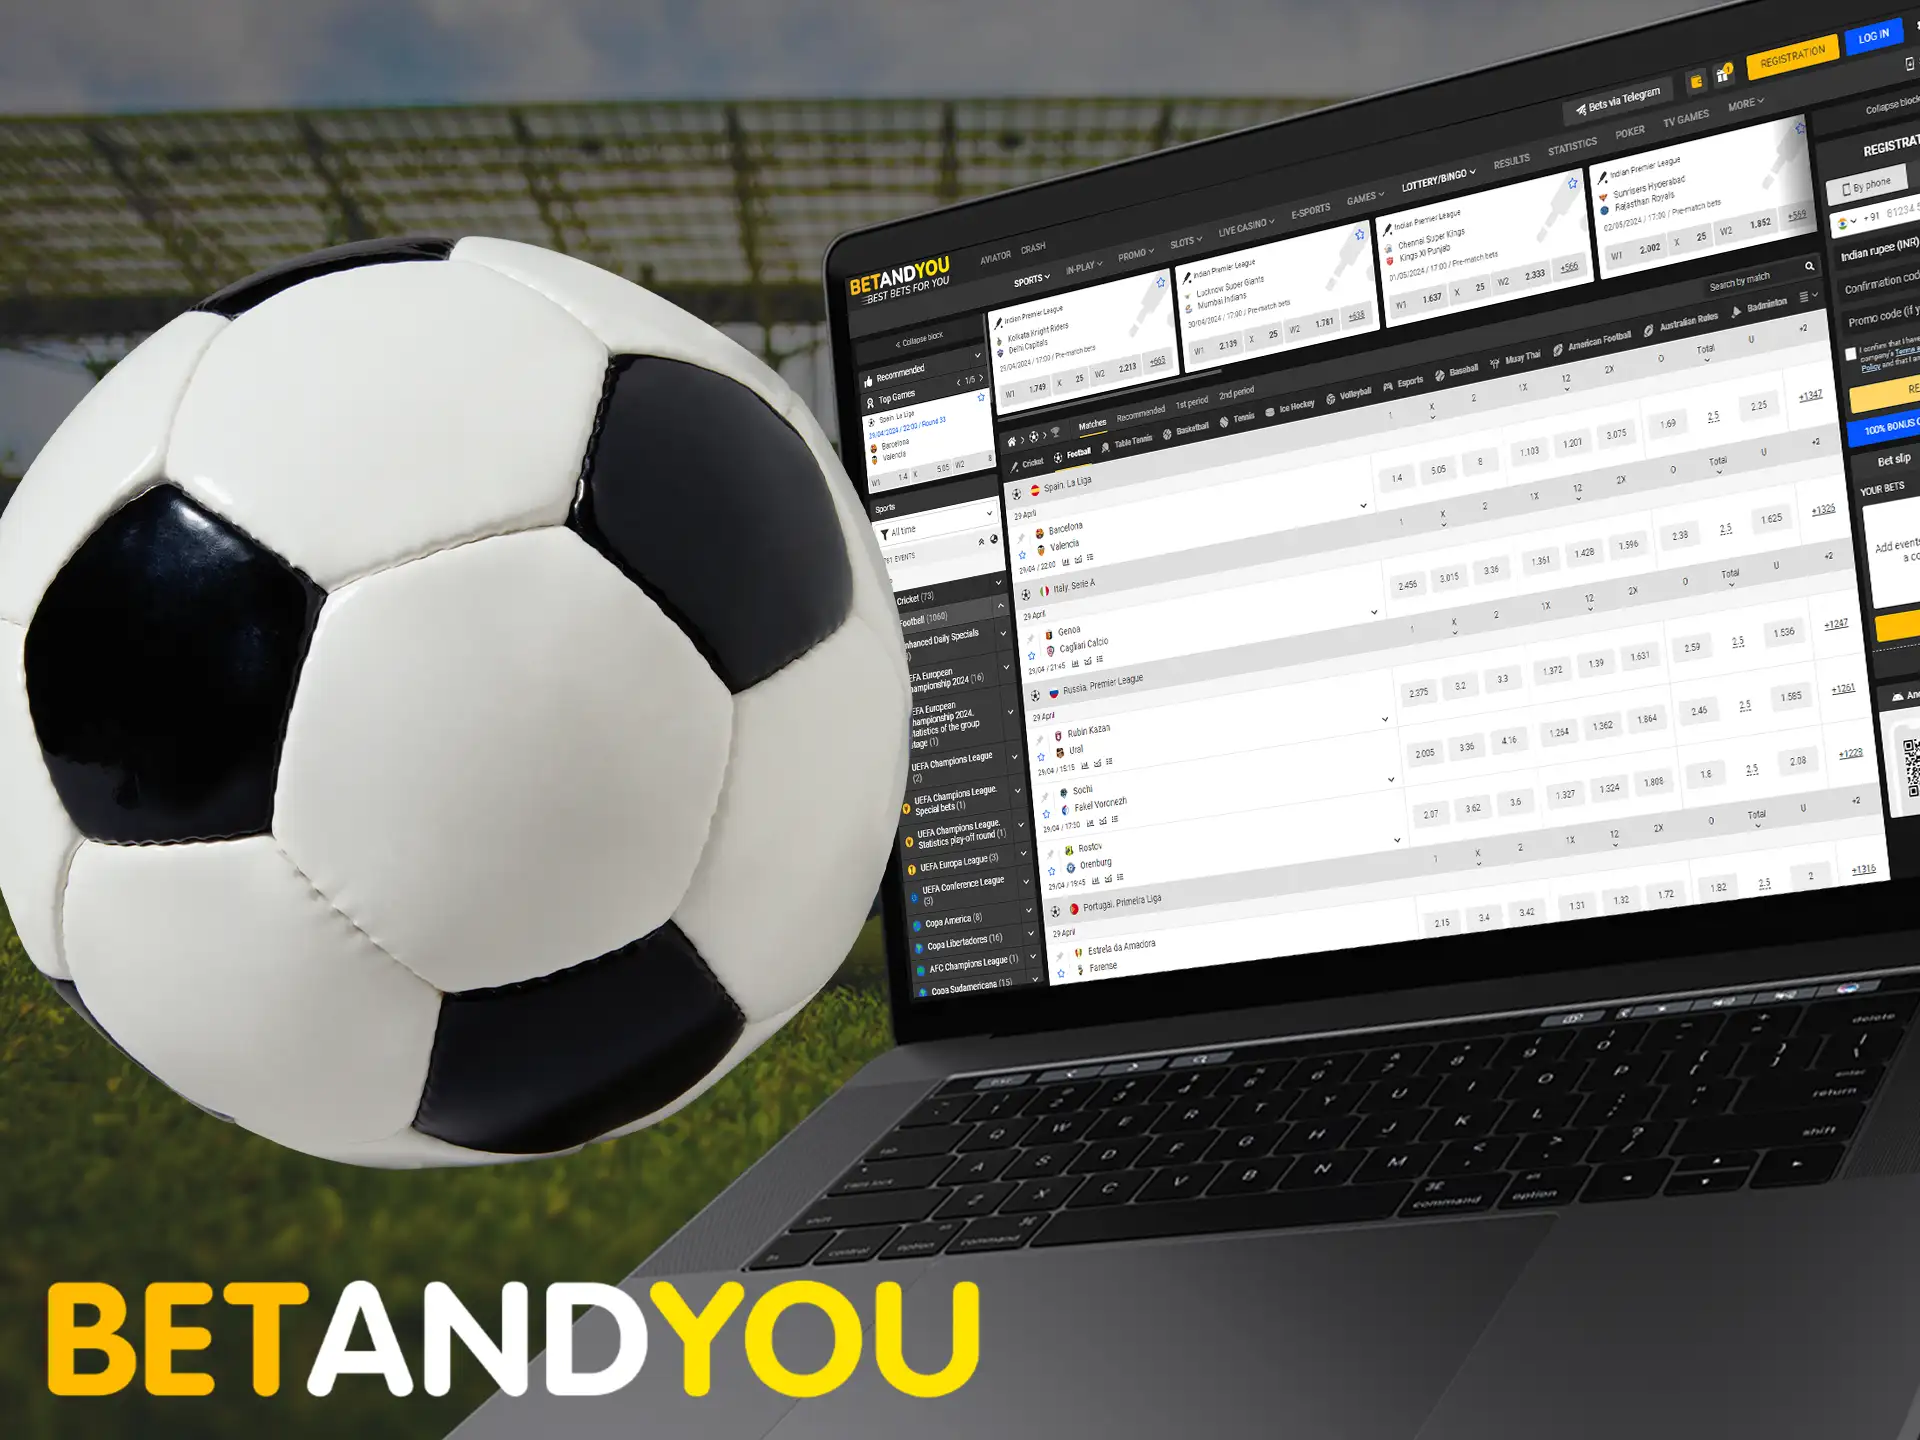 Users are offered an extensive section with football bets on Betandyou, where everyone can find the match they are interested in.